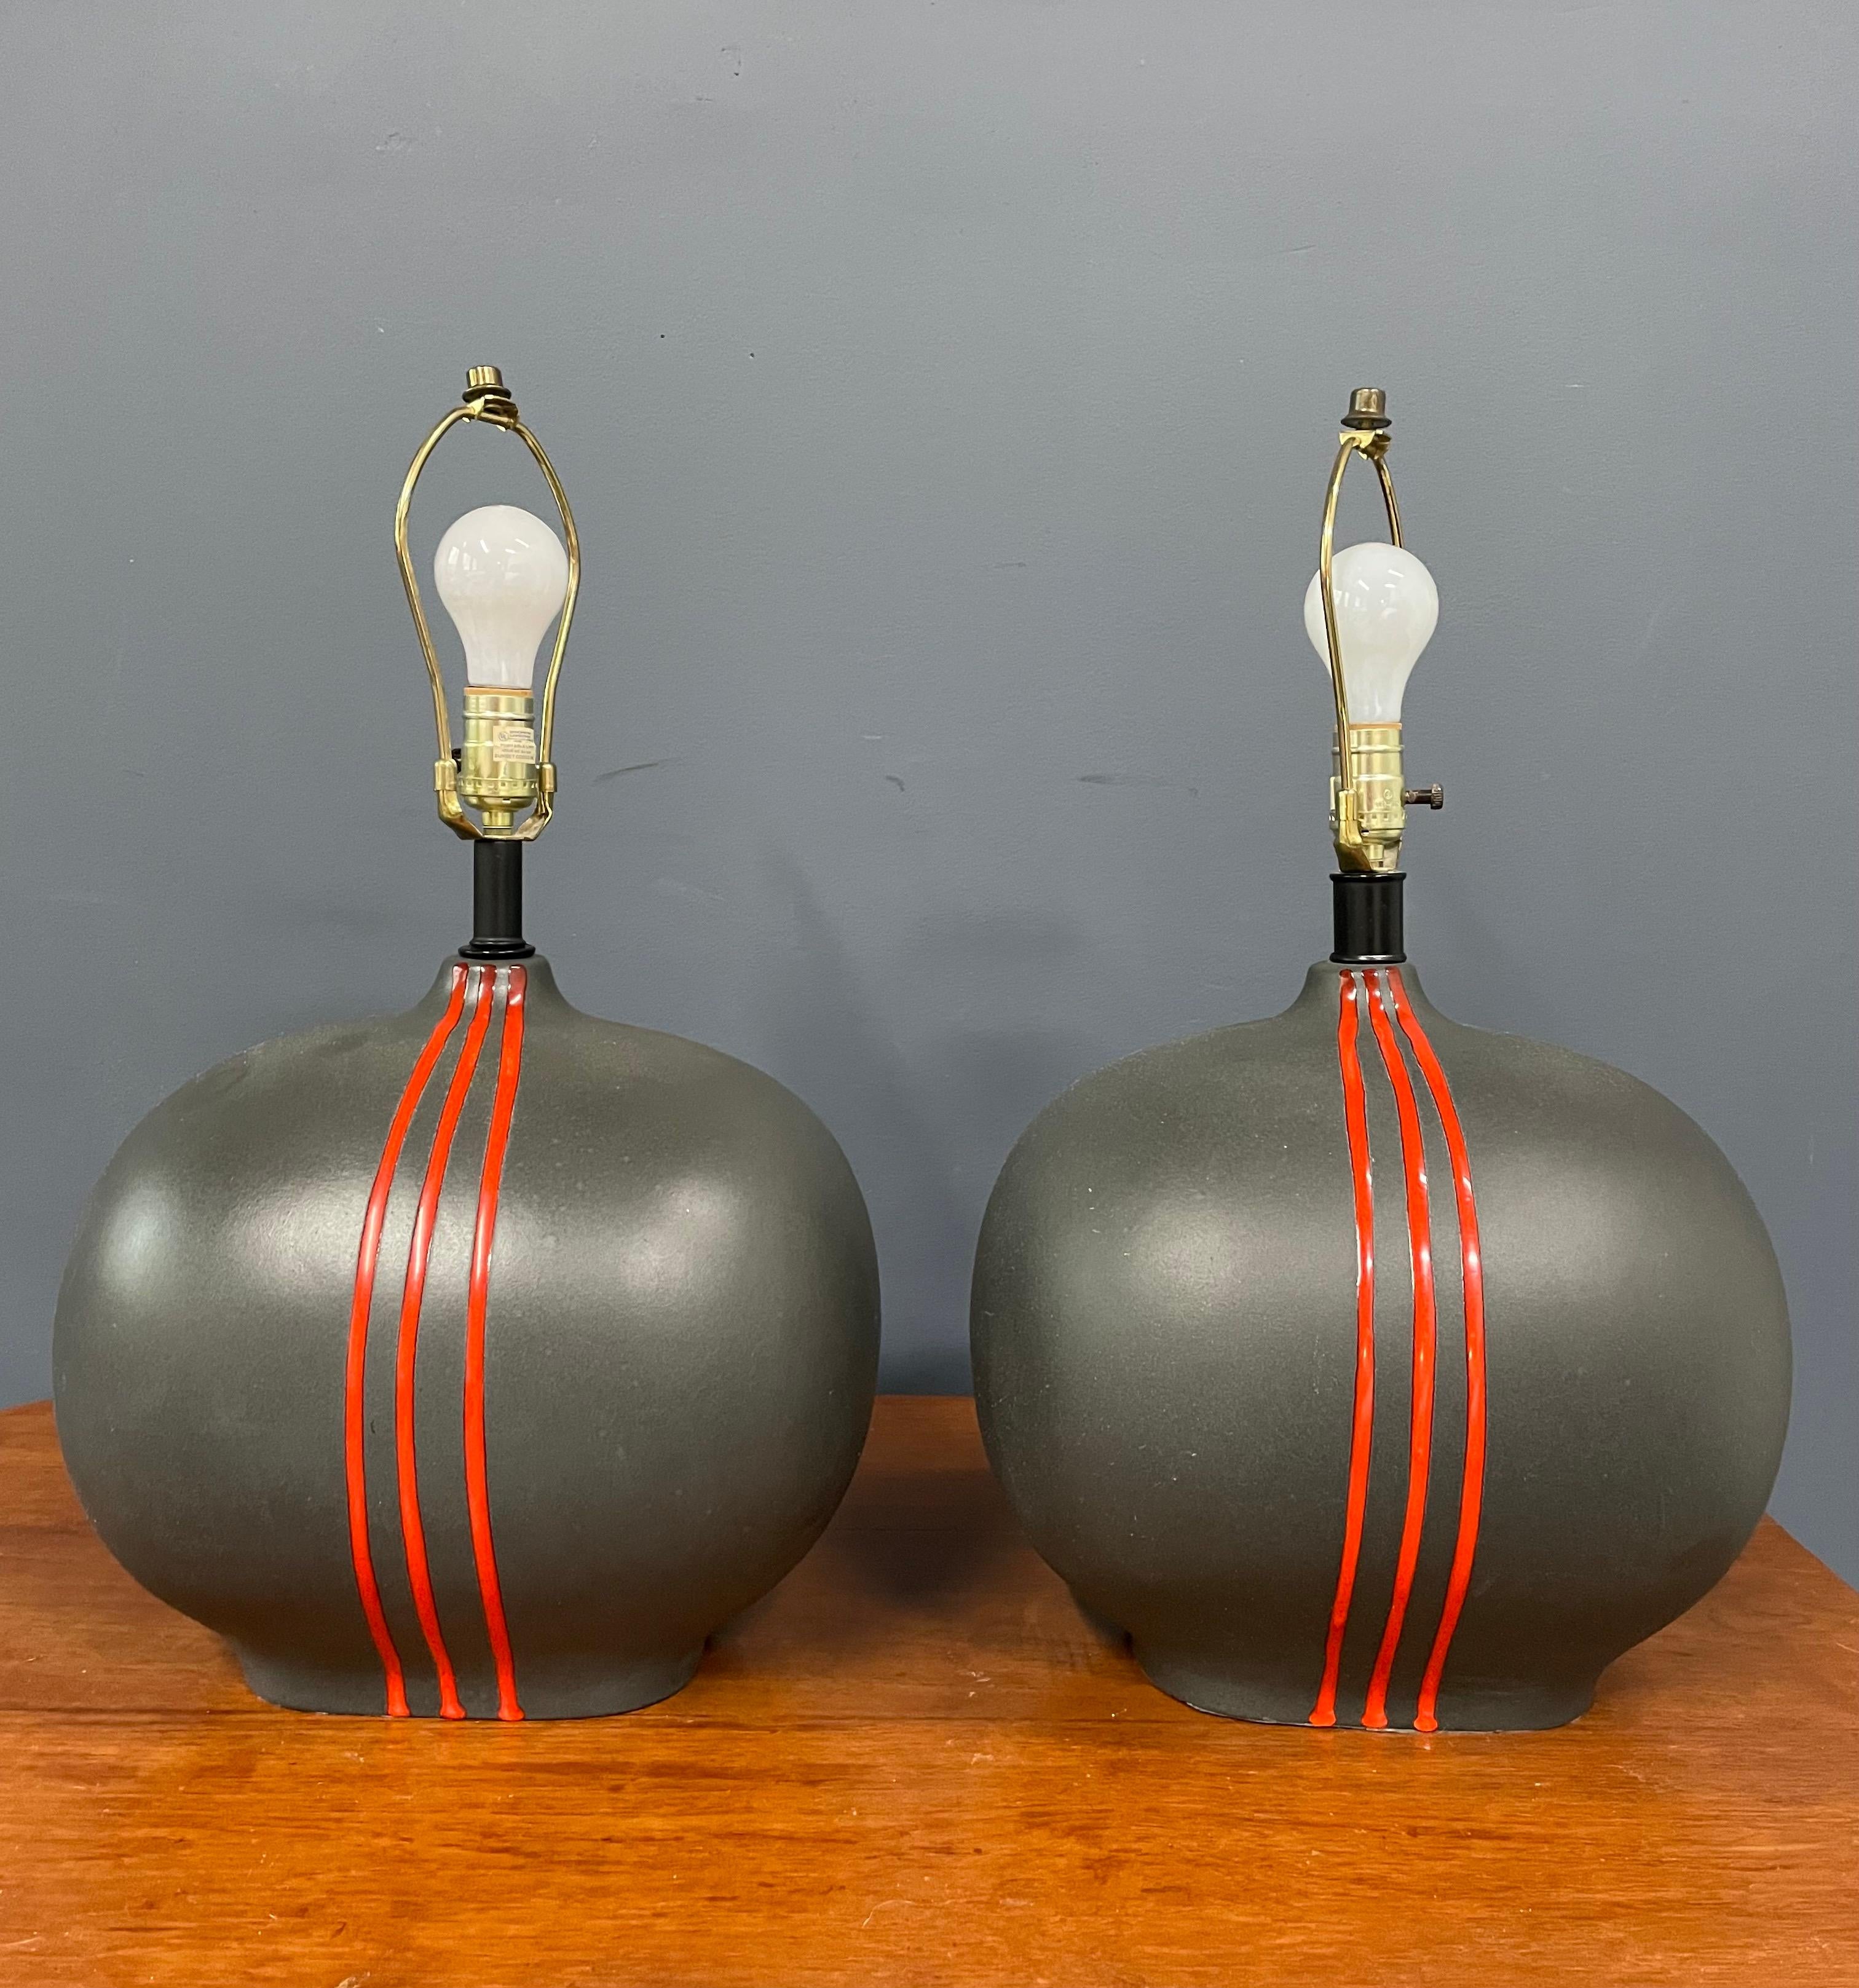 Very cool ceramic lamps by Sunset Cosco, a manufacturer of many interesting lamps of the 1980s and 90s.